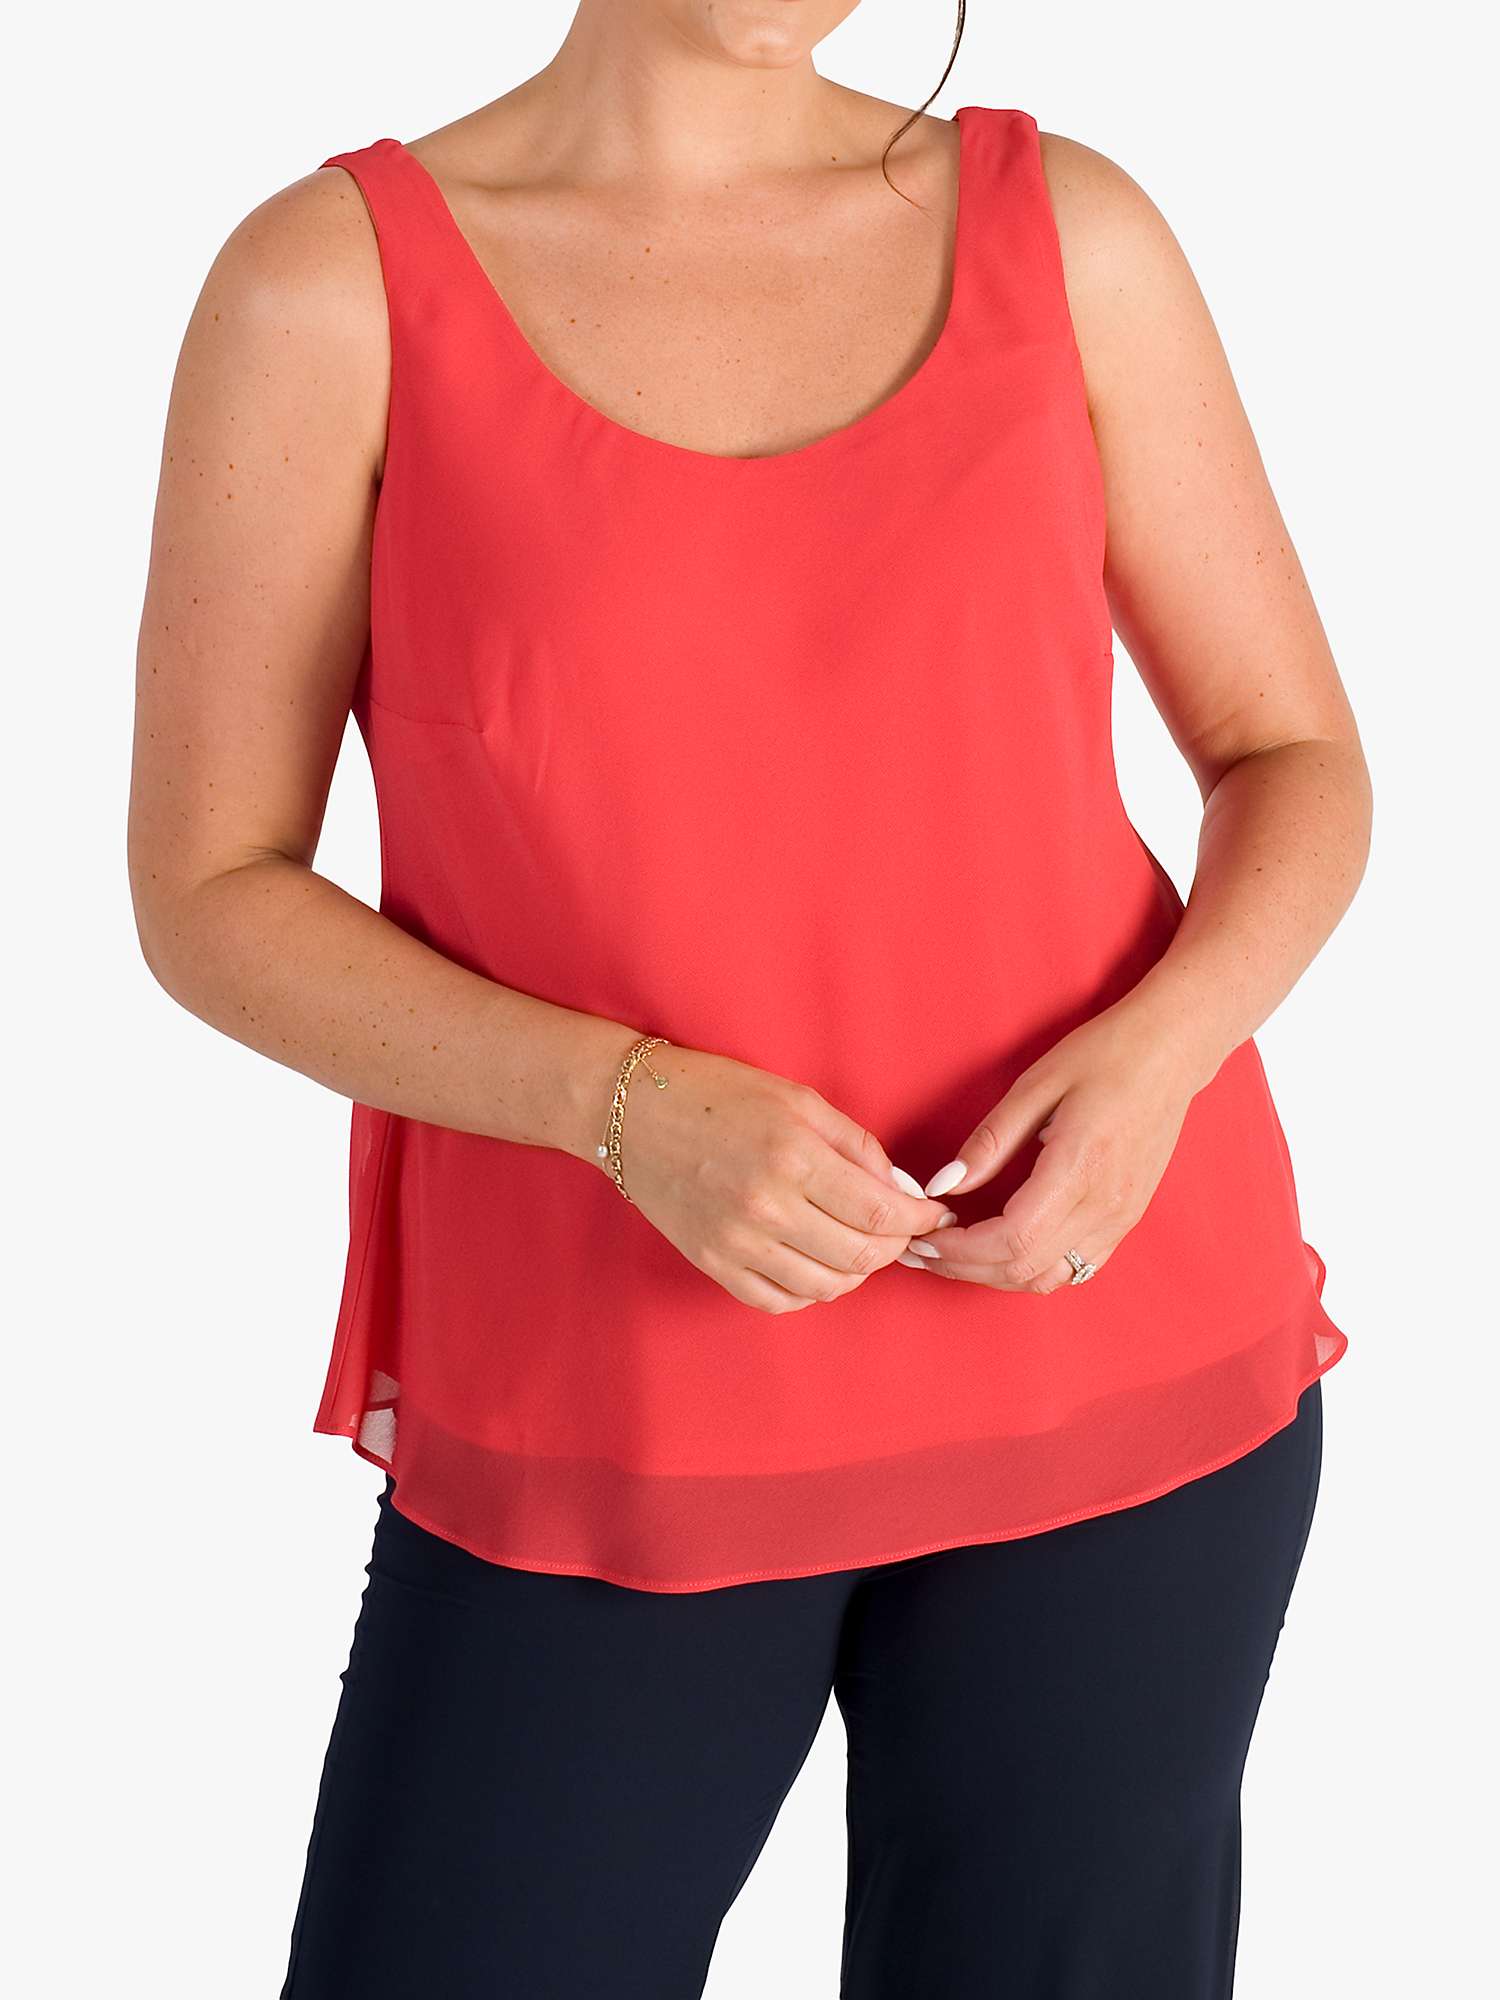 Buy Chesca Chiffon Camisole Online at johnlewis.com